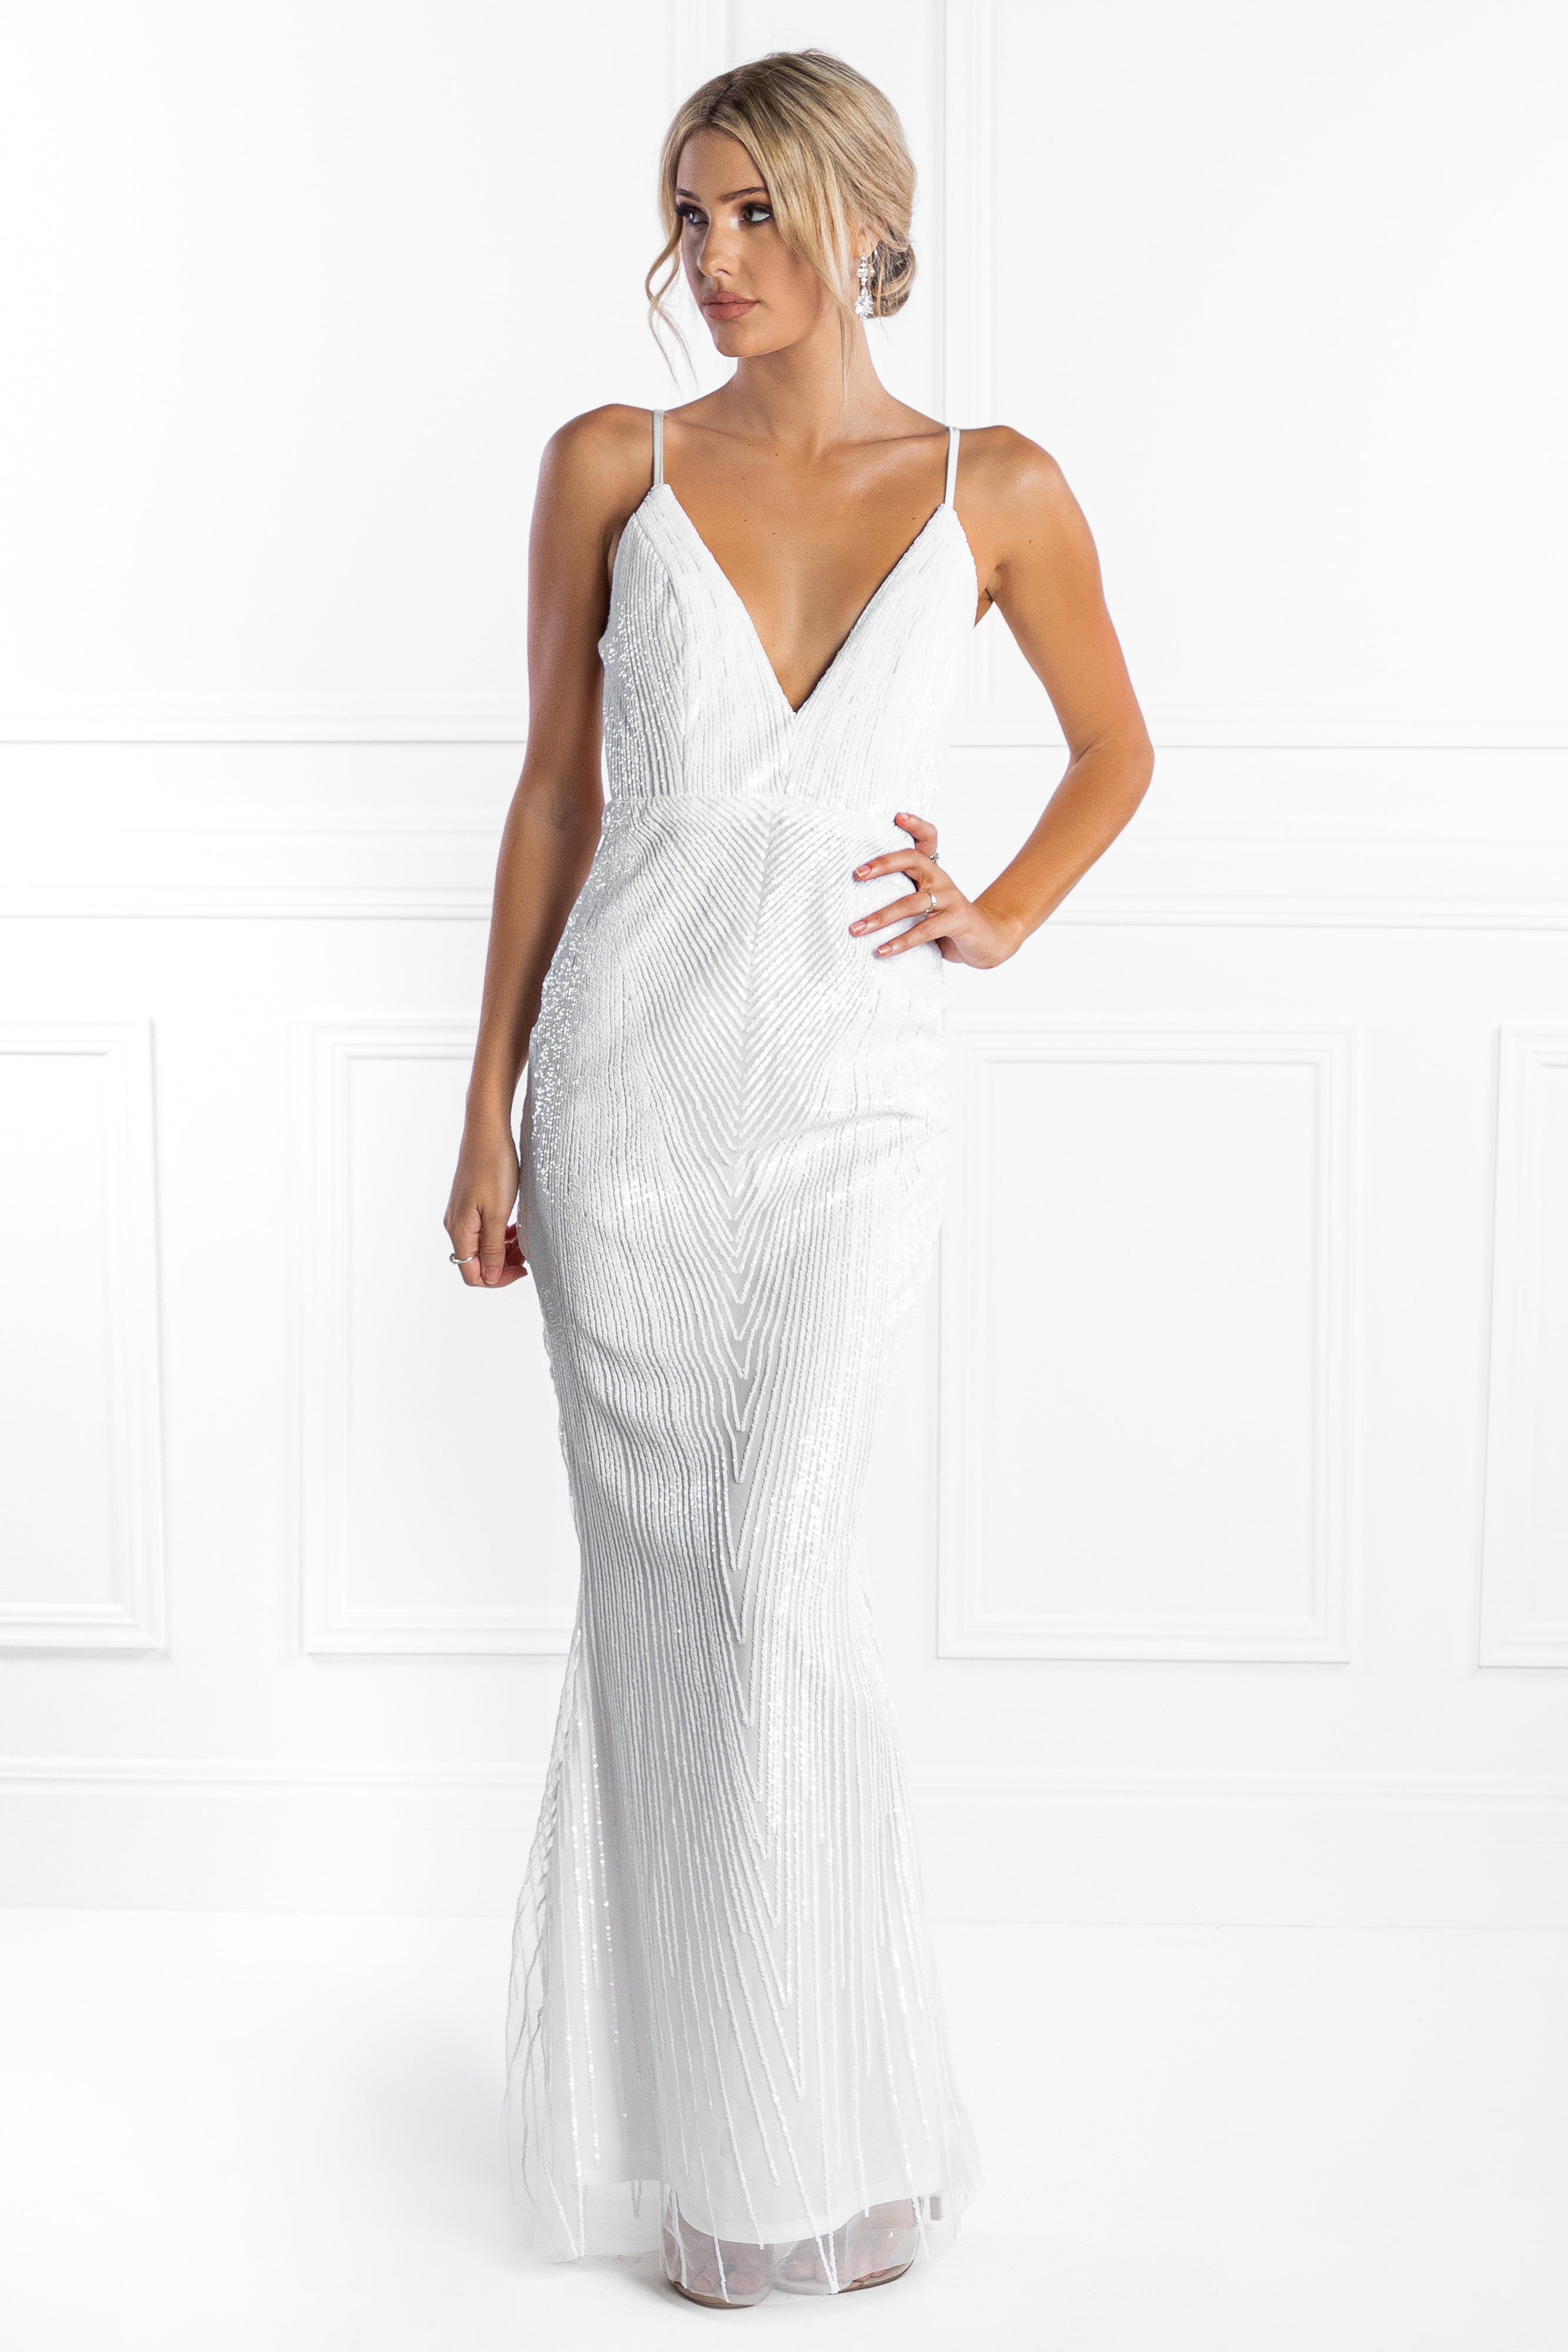 Honey Couture JAYLEN White Sequin Low Back Evening Gown Dress Honey Couture$ AfterPay Humm ZipPay LayBuy Sezzle